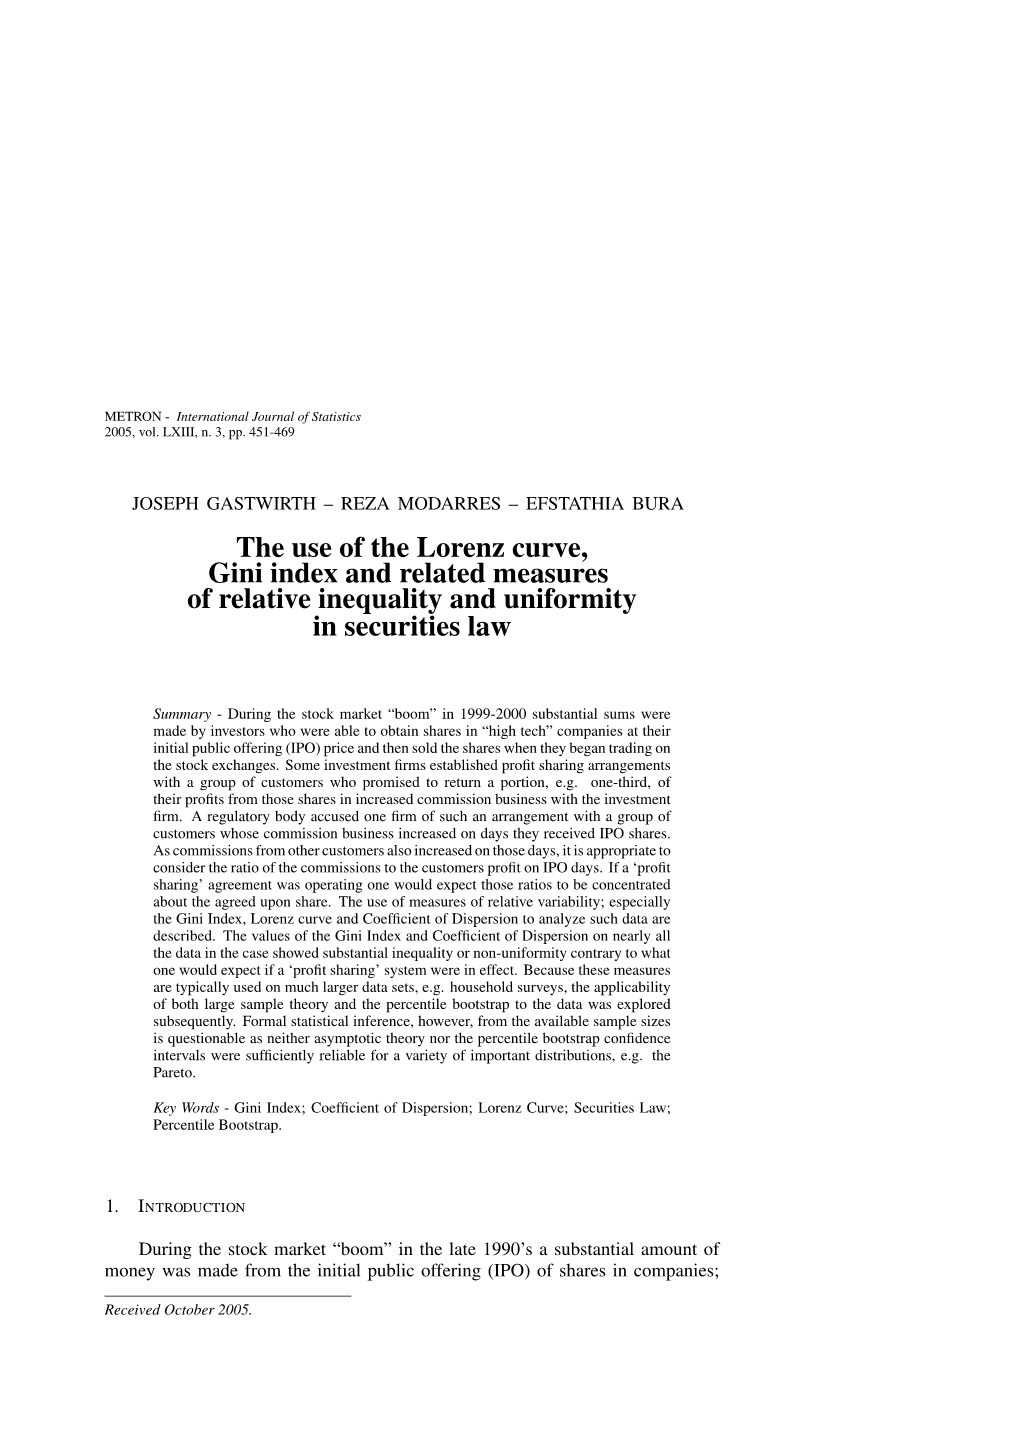 The Use of the Lorenz Curve, Gini Index and Related Measures of Relative Inequality and Uniformity in Securities Law